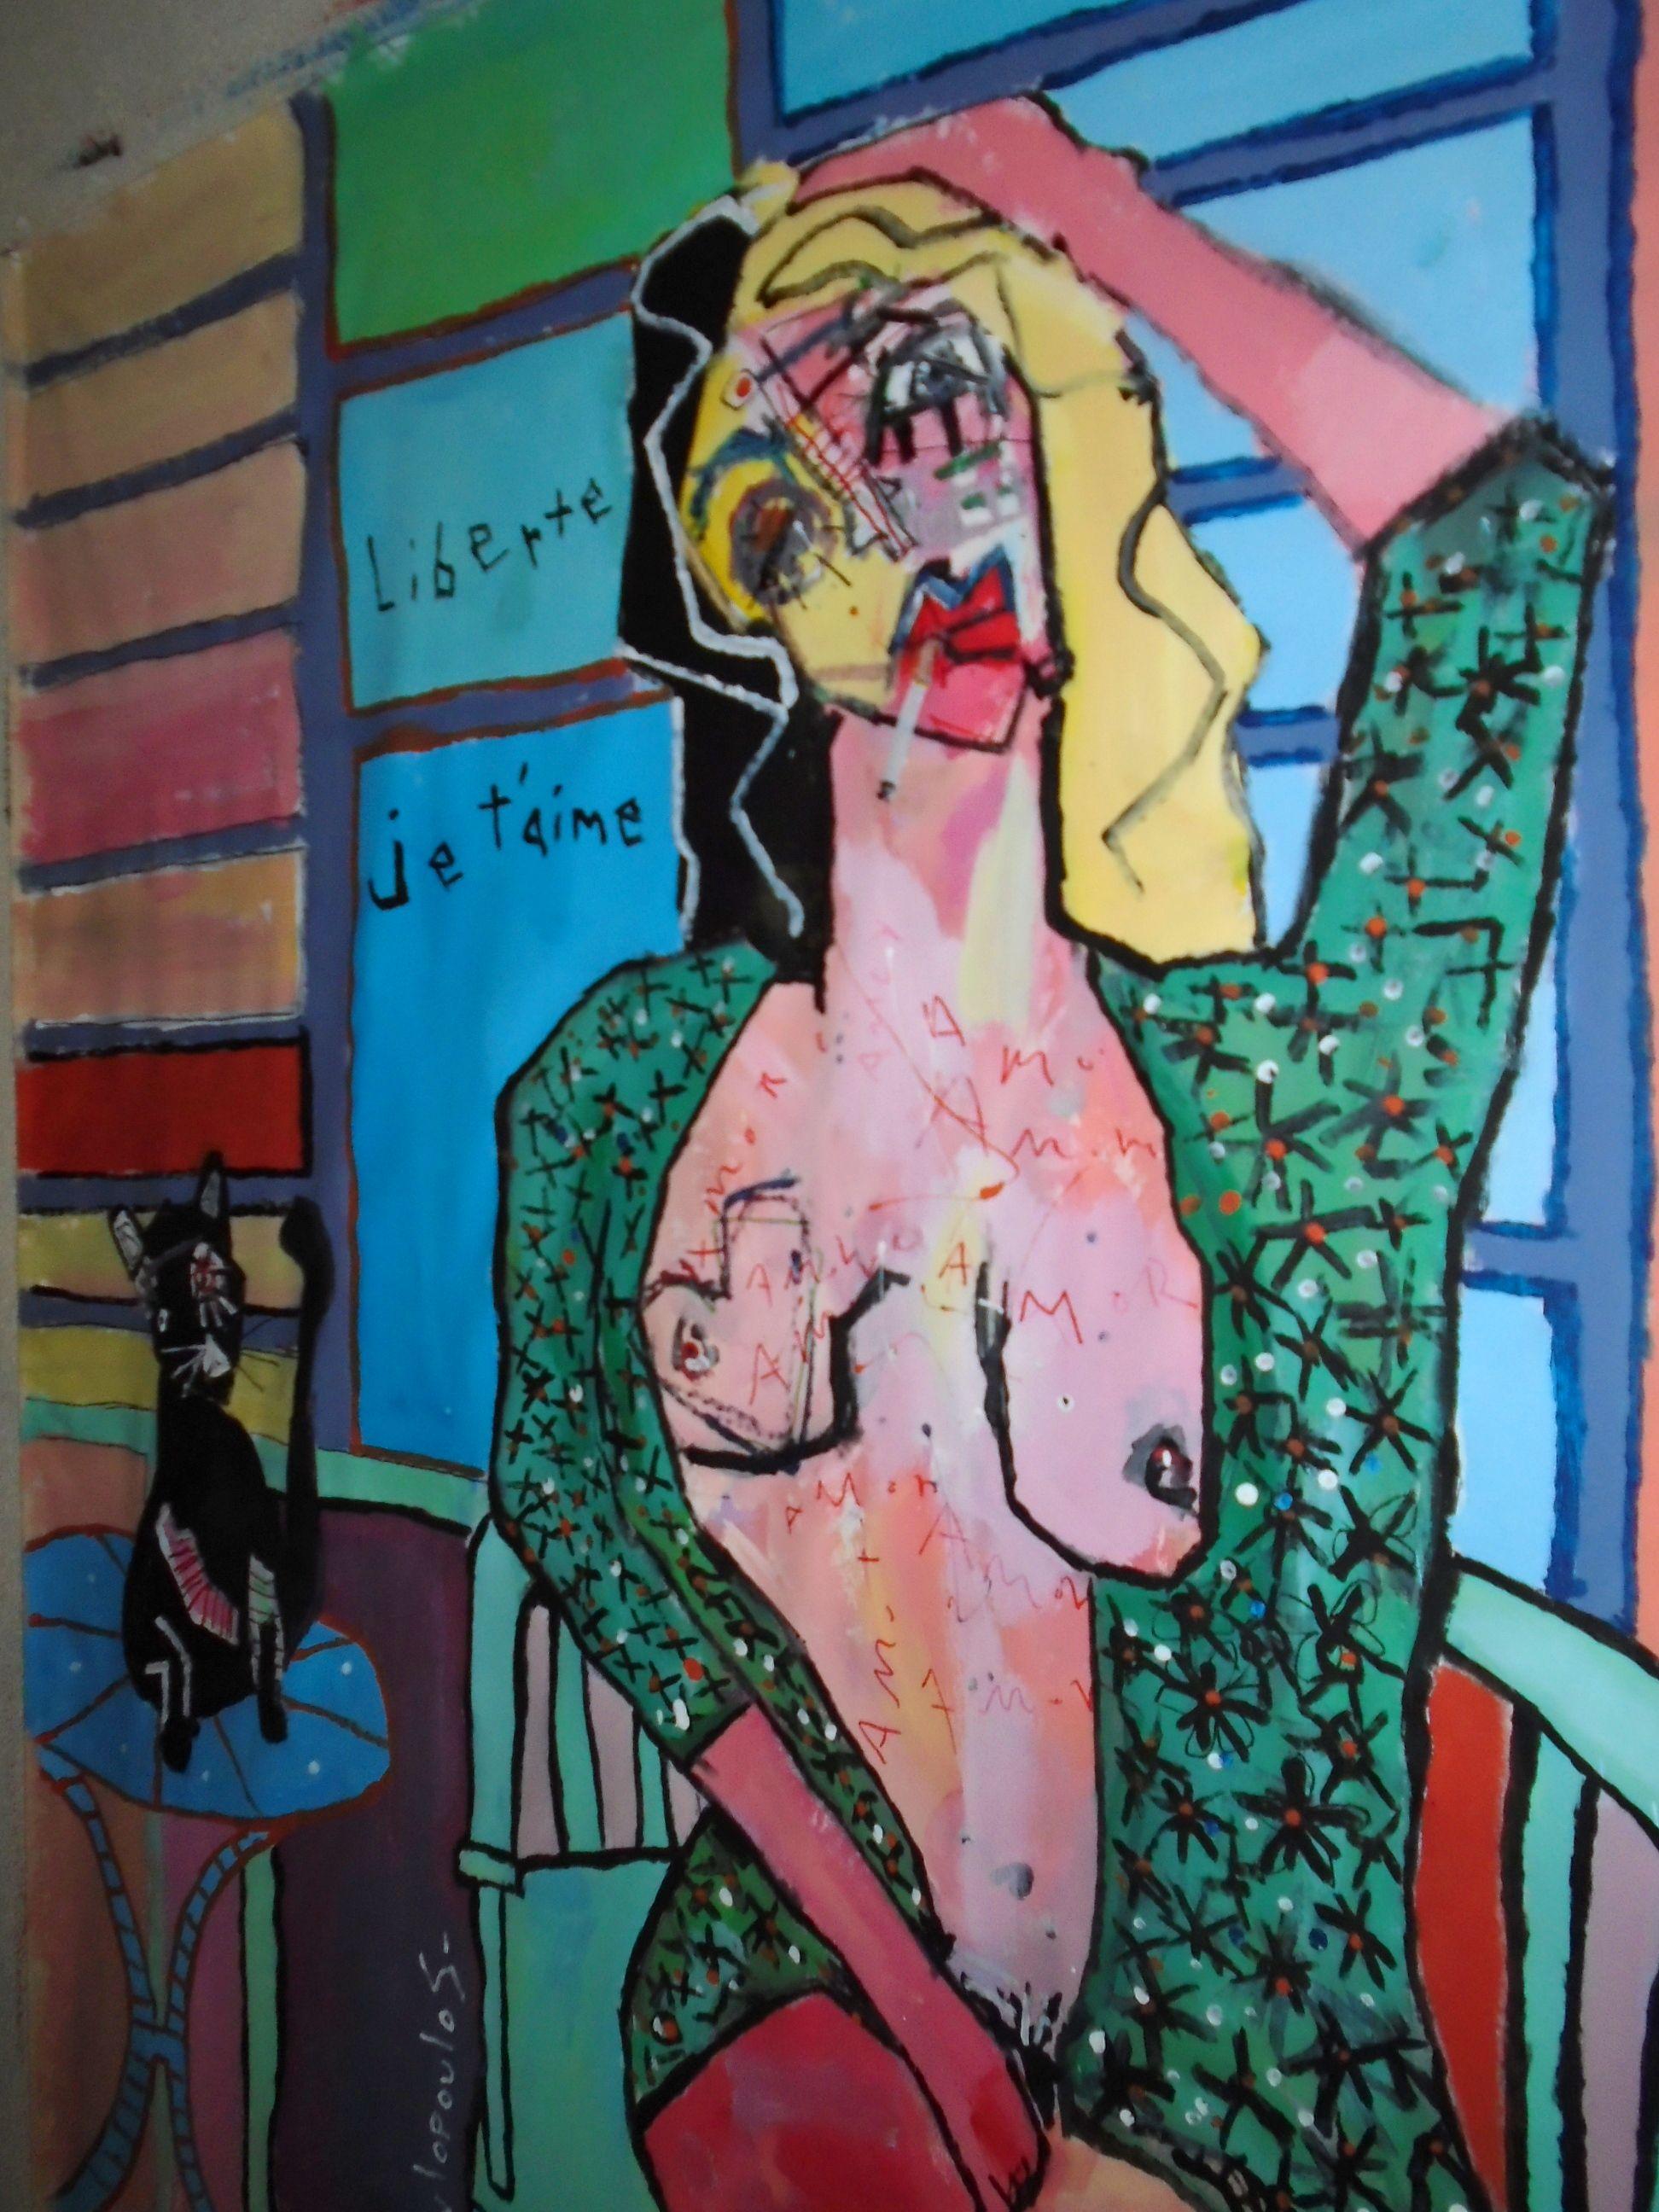 Liberte Je t'aime # 2, Painting, Acrylic on Canvas For Sale 2